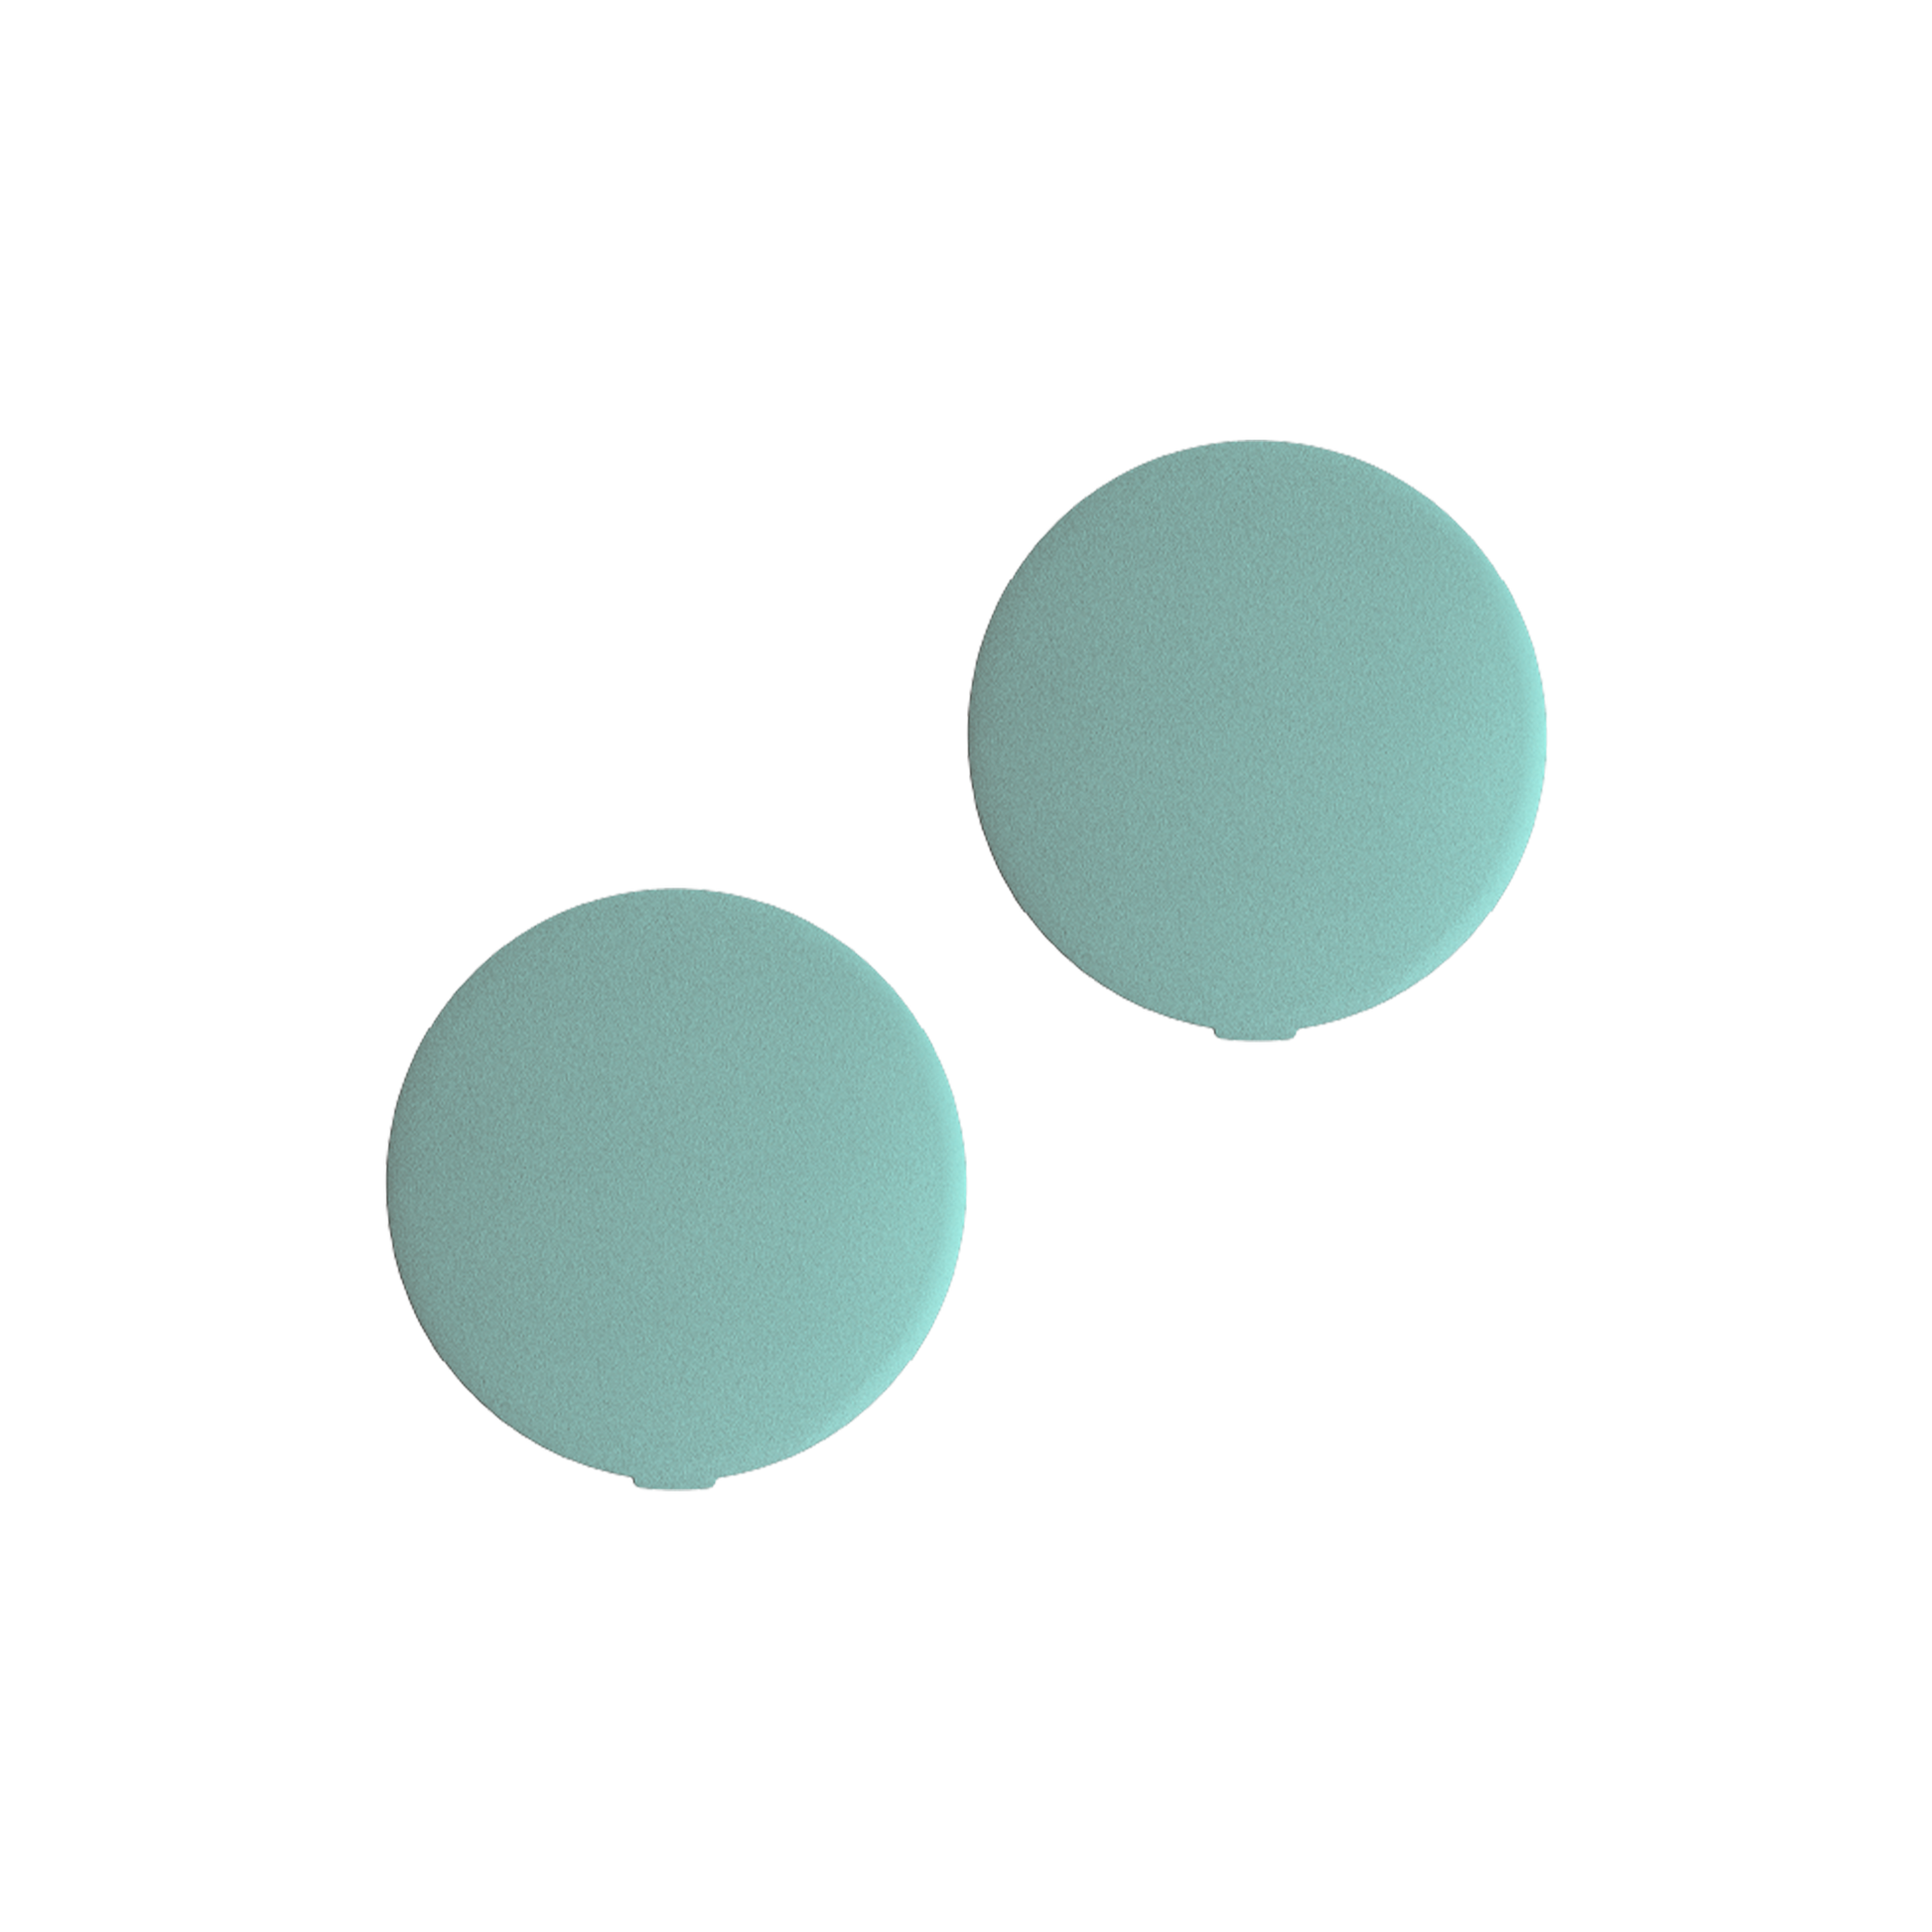 AT-4003-ETEAL?2 polish Aluminum Oxide Exfoliator Replacements in teal